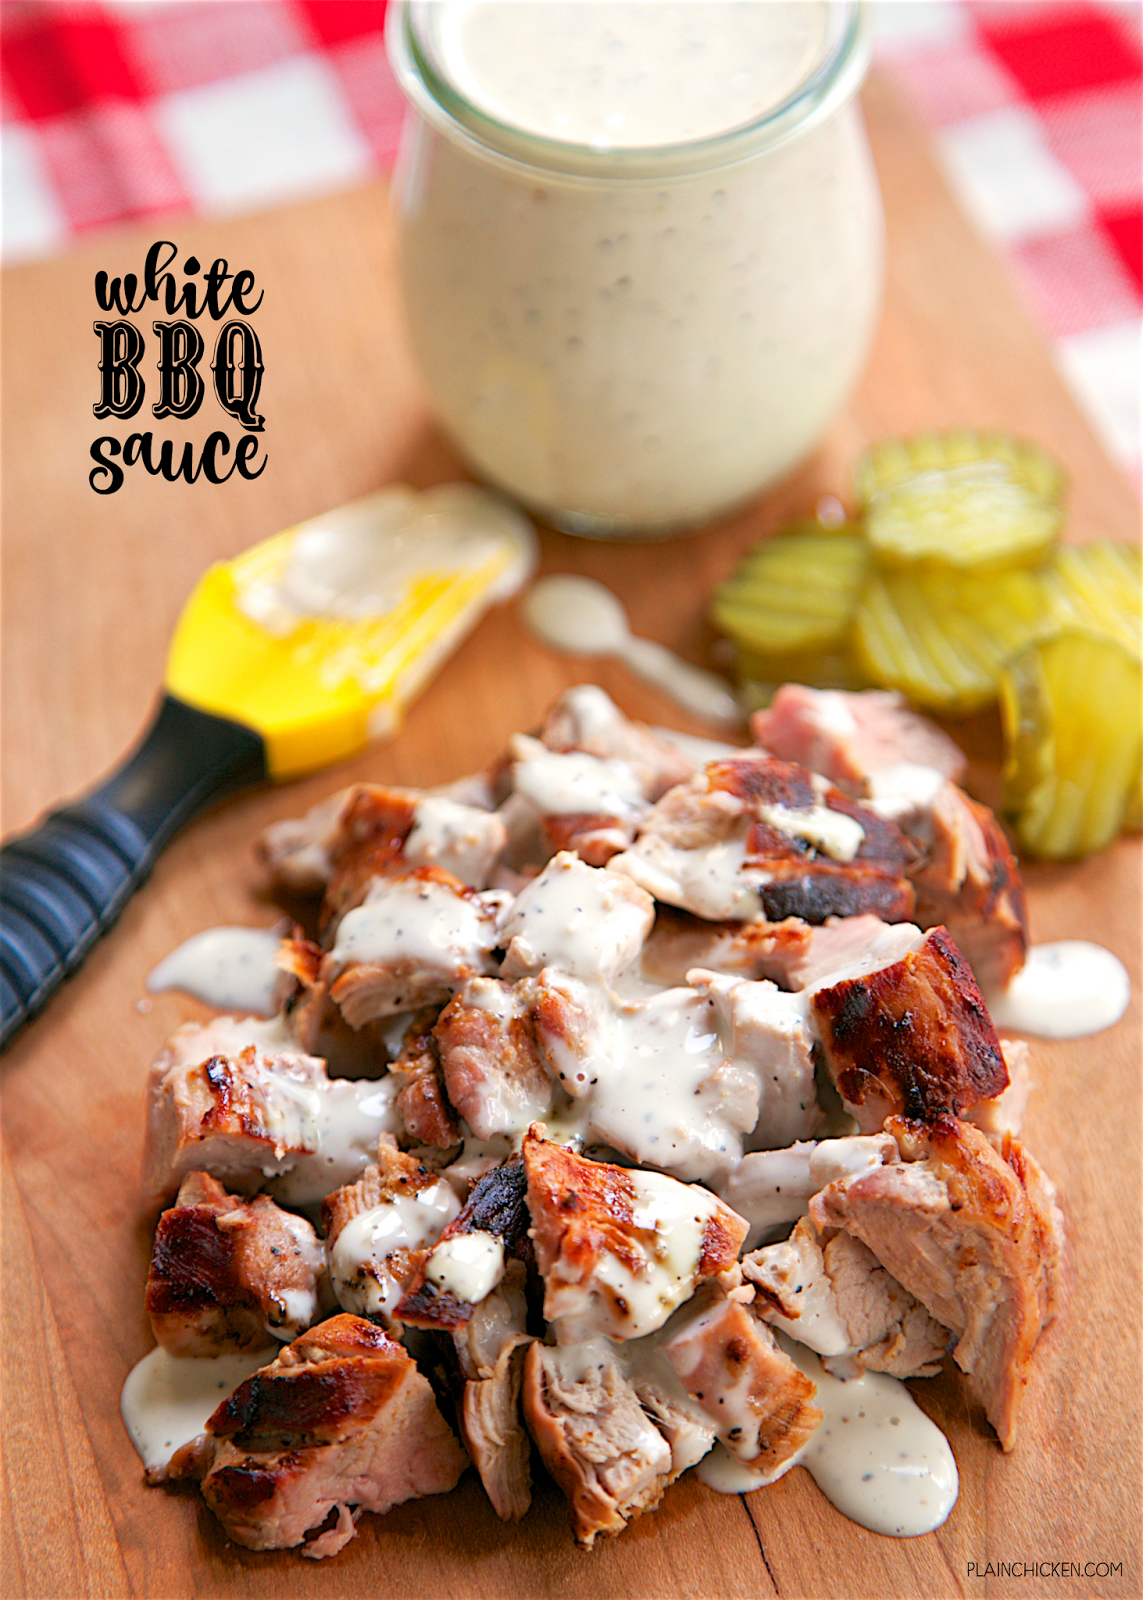 White BBQ Sauce {Alabama White Sauce} - mayonnaise, vinegar, apple juice, horseradish, pepper, lemon, salt, cayenne - Zesty white sauce that is great as a marinade, baste or dipping sauce. Keeps for 2 weeks. Great on pork and chicken!!